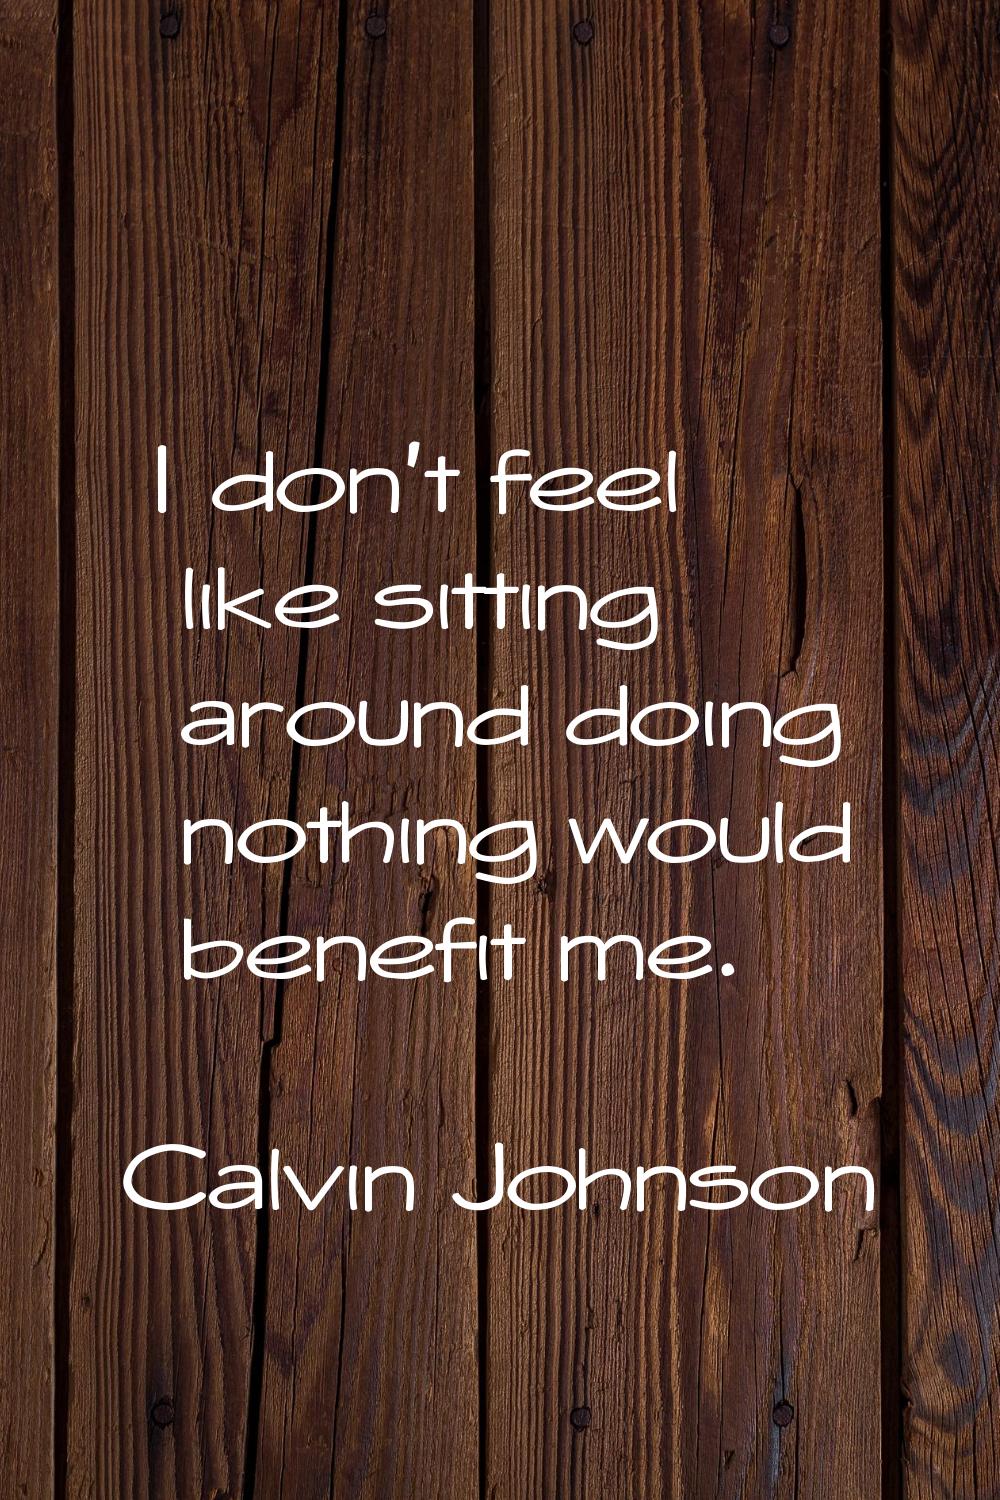 I don't feel like sitting around doing nothing would benefit me.